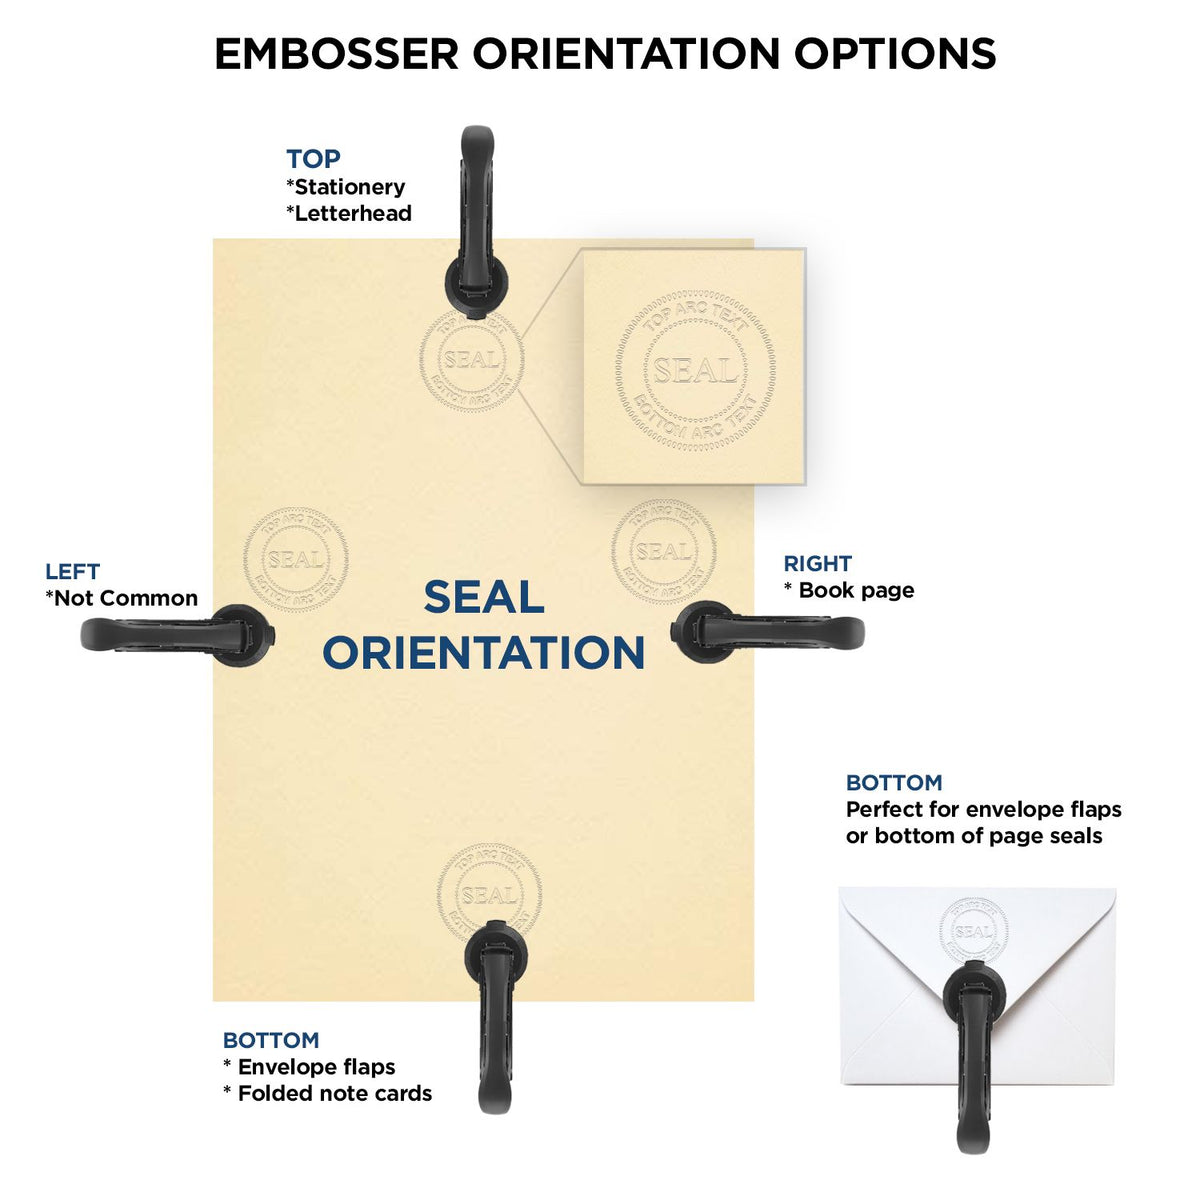 An infographic for the Handheld Maine Professional Engineer Embosser showing embosser orientation, this is showing examples of a top, bottom, right and left insert.